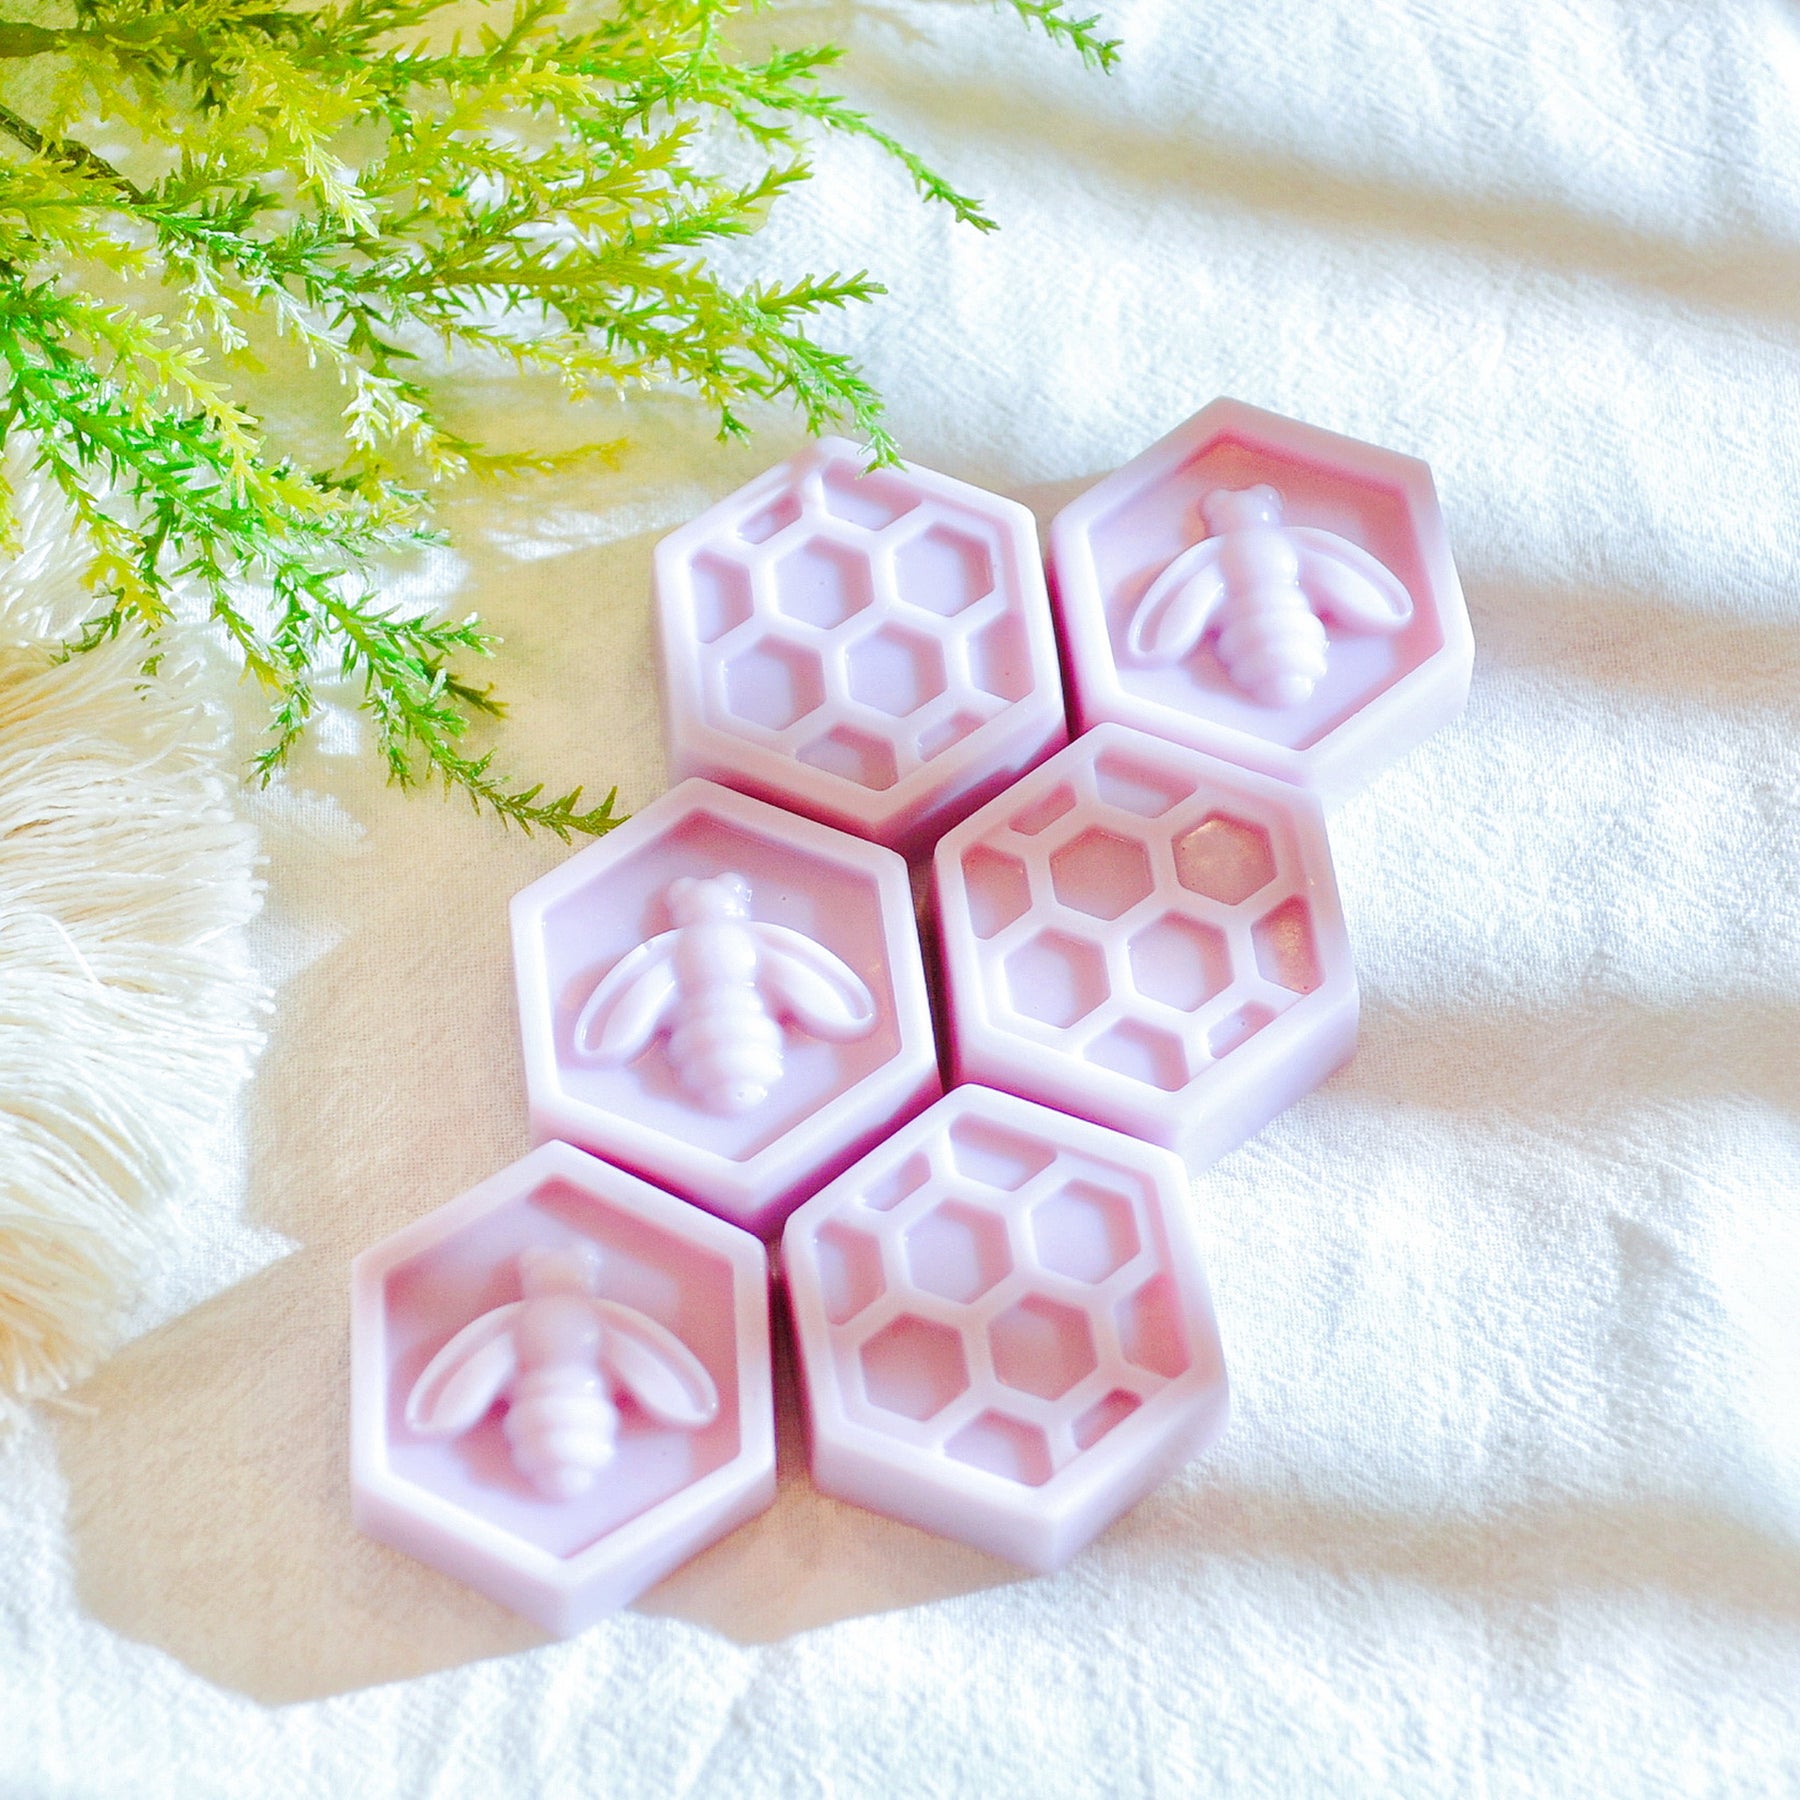 Six bee honeycomb-shaped soy wax melts from LMJ Candles, beautifully arranged on a ceramic wax warmer, showcasing their unique honeycomb design and honey scent.